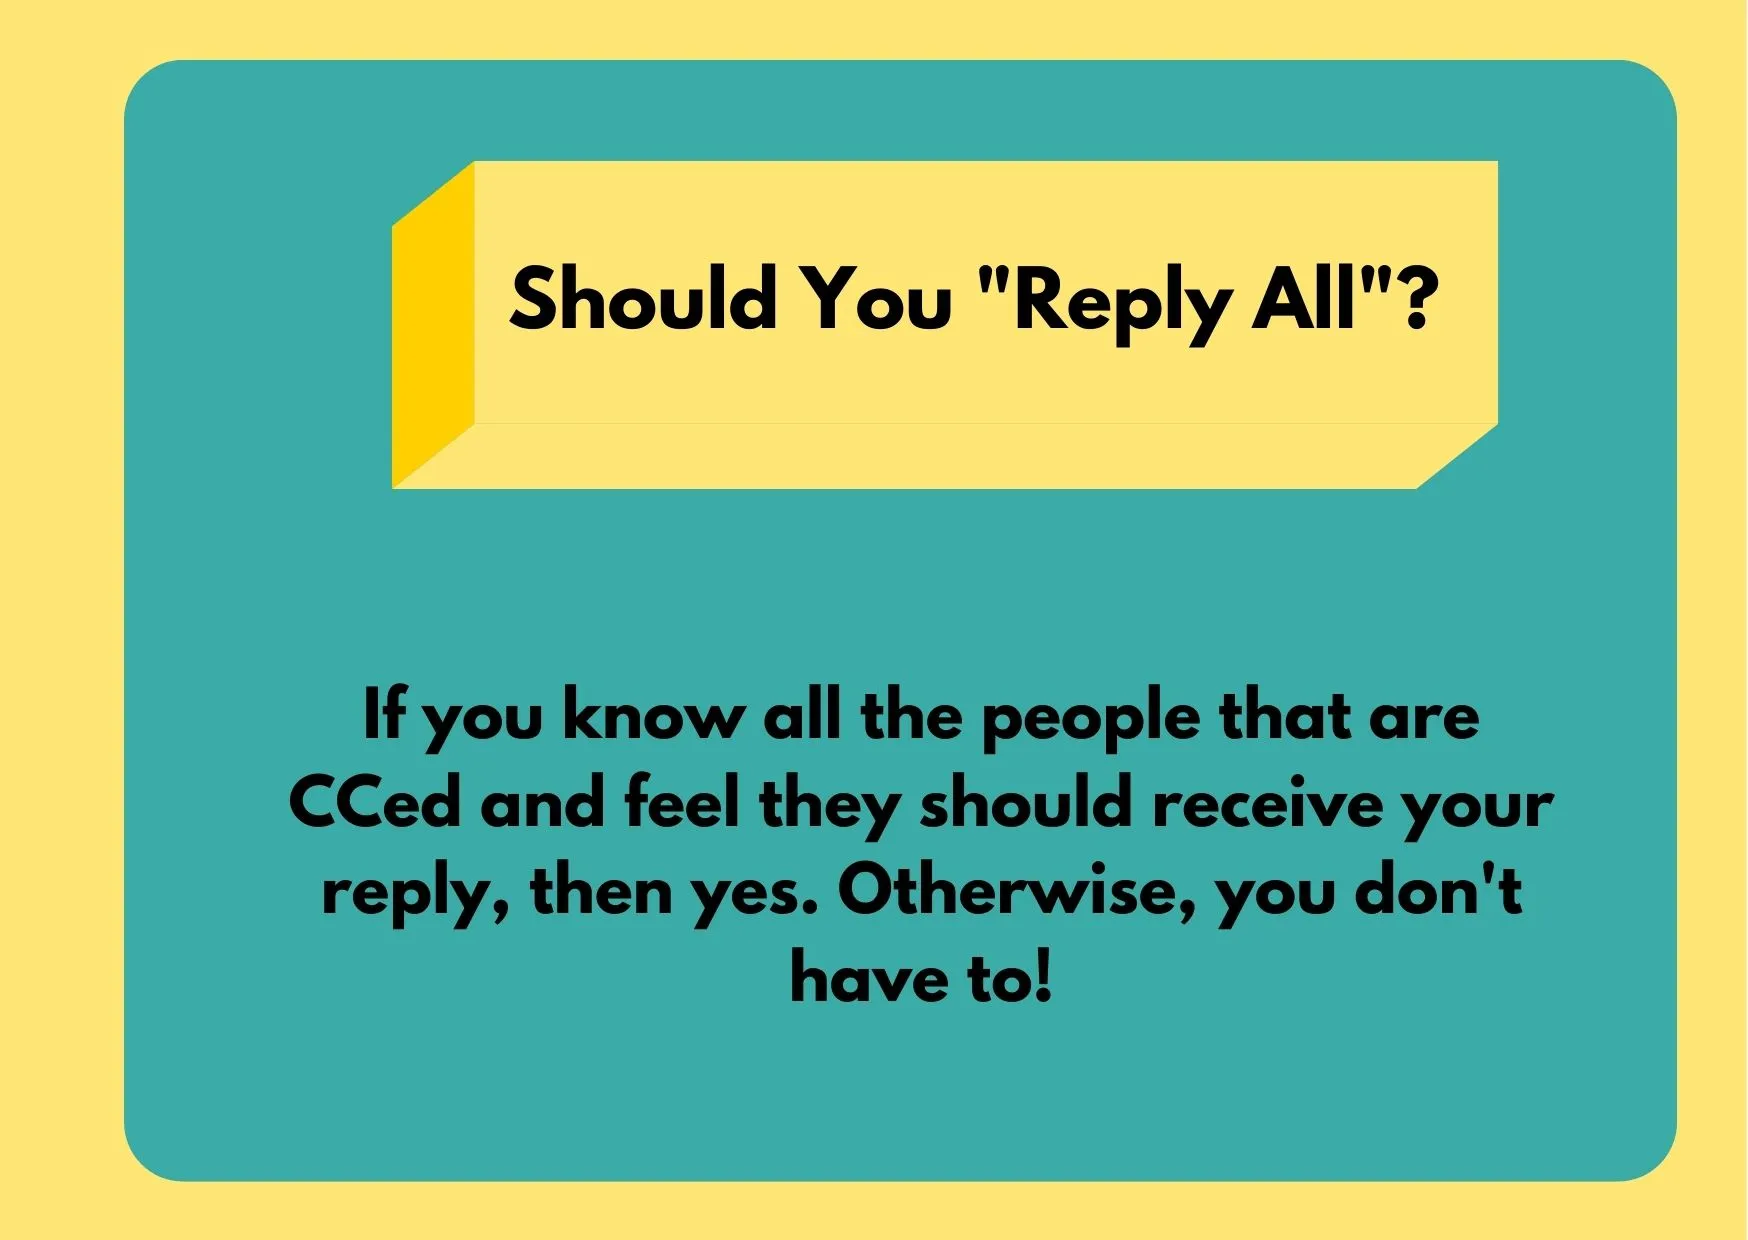 Graphic asking if you should "Reply All" on a business email. Answer is that you should only do that if you know all the people in the email chain and feel that they should have the information you're sending, otherwise, it's not your job to send information to strangers!